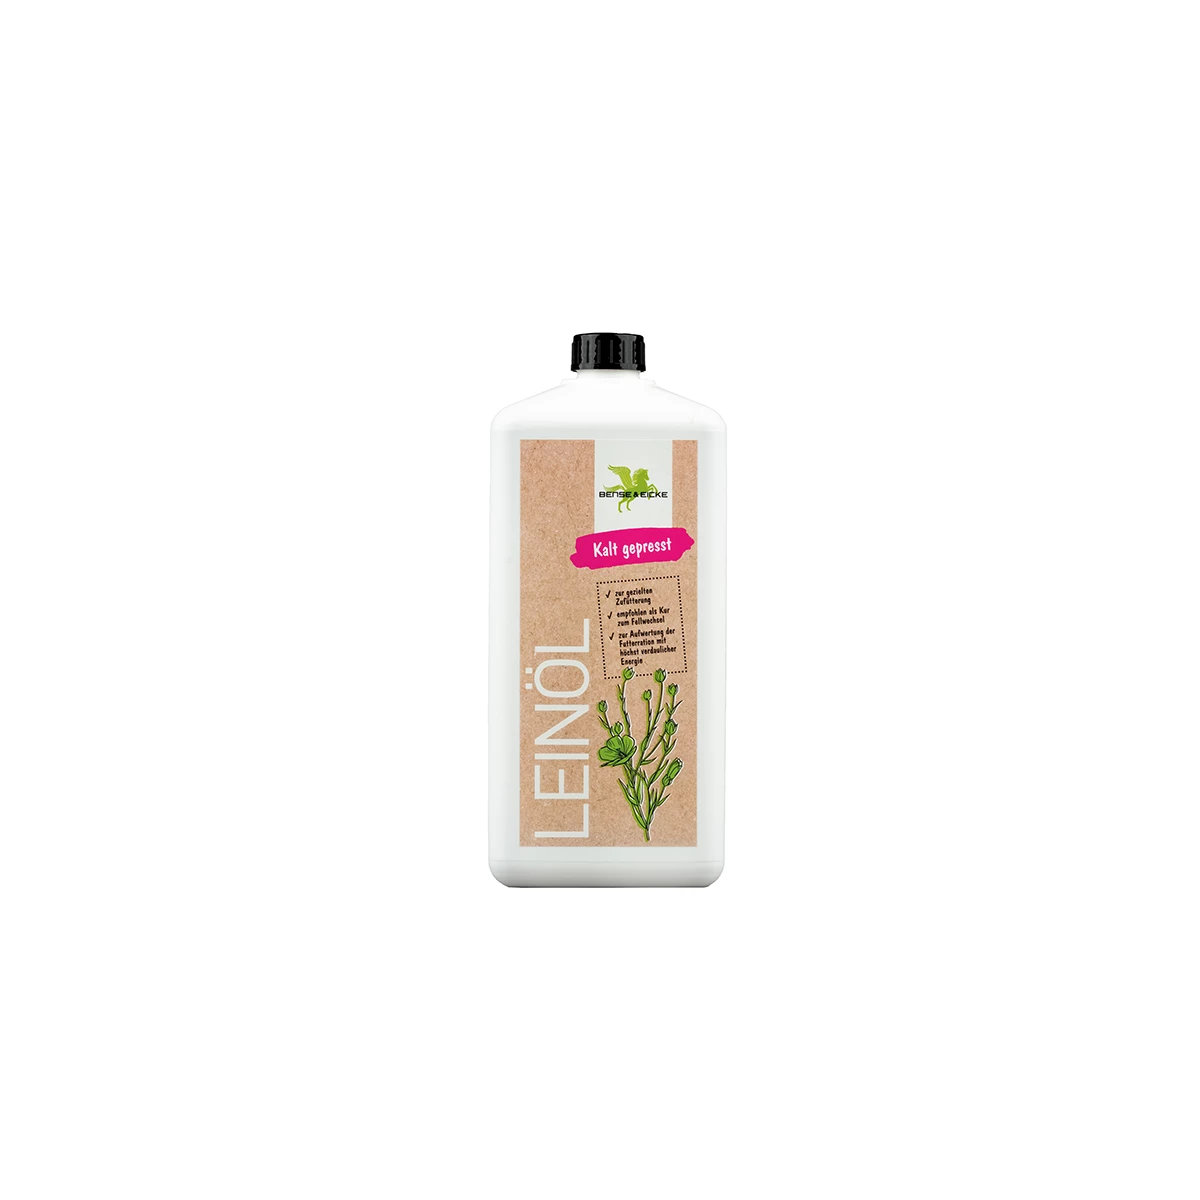 Parisol linseed oil - cold pressed, 1000ml